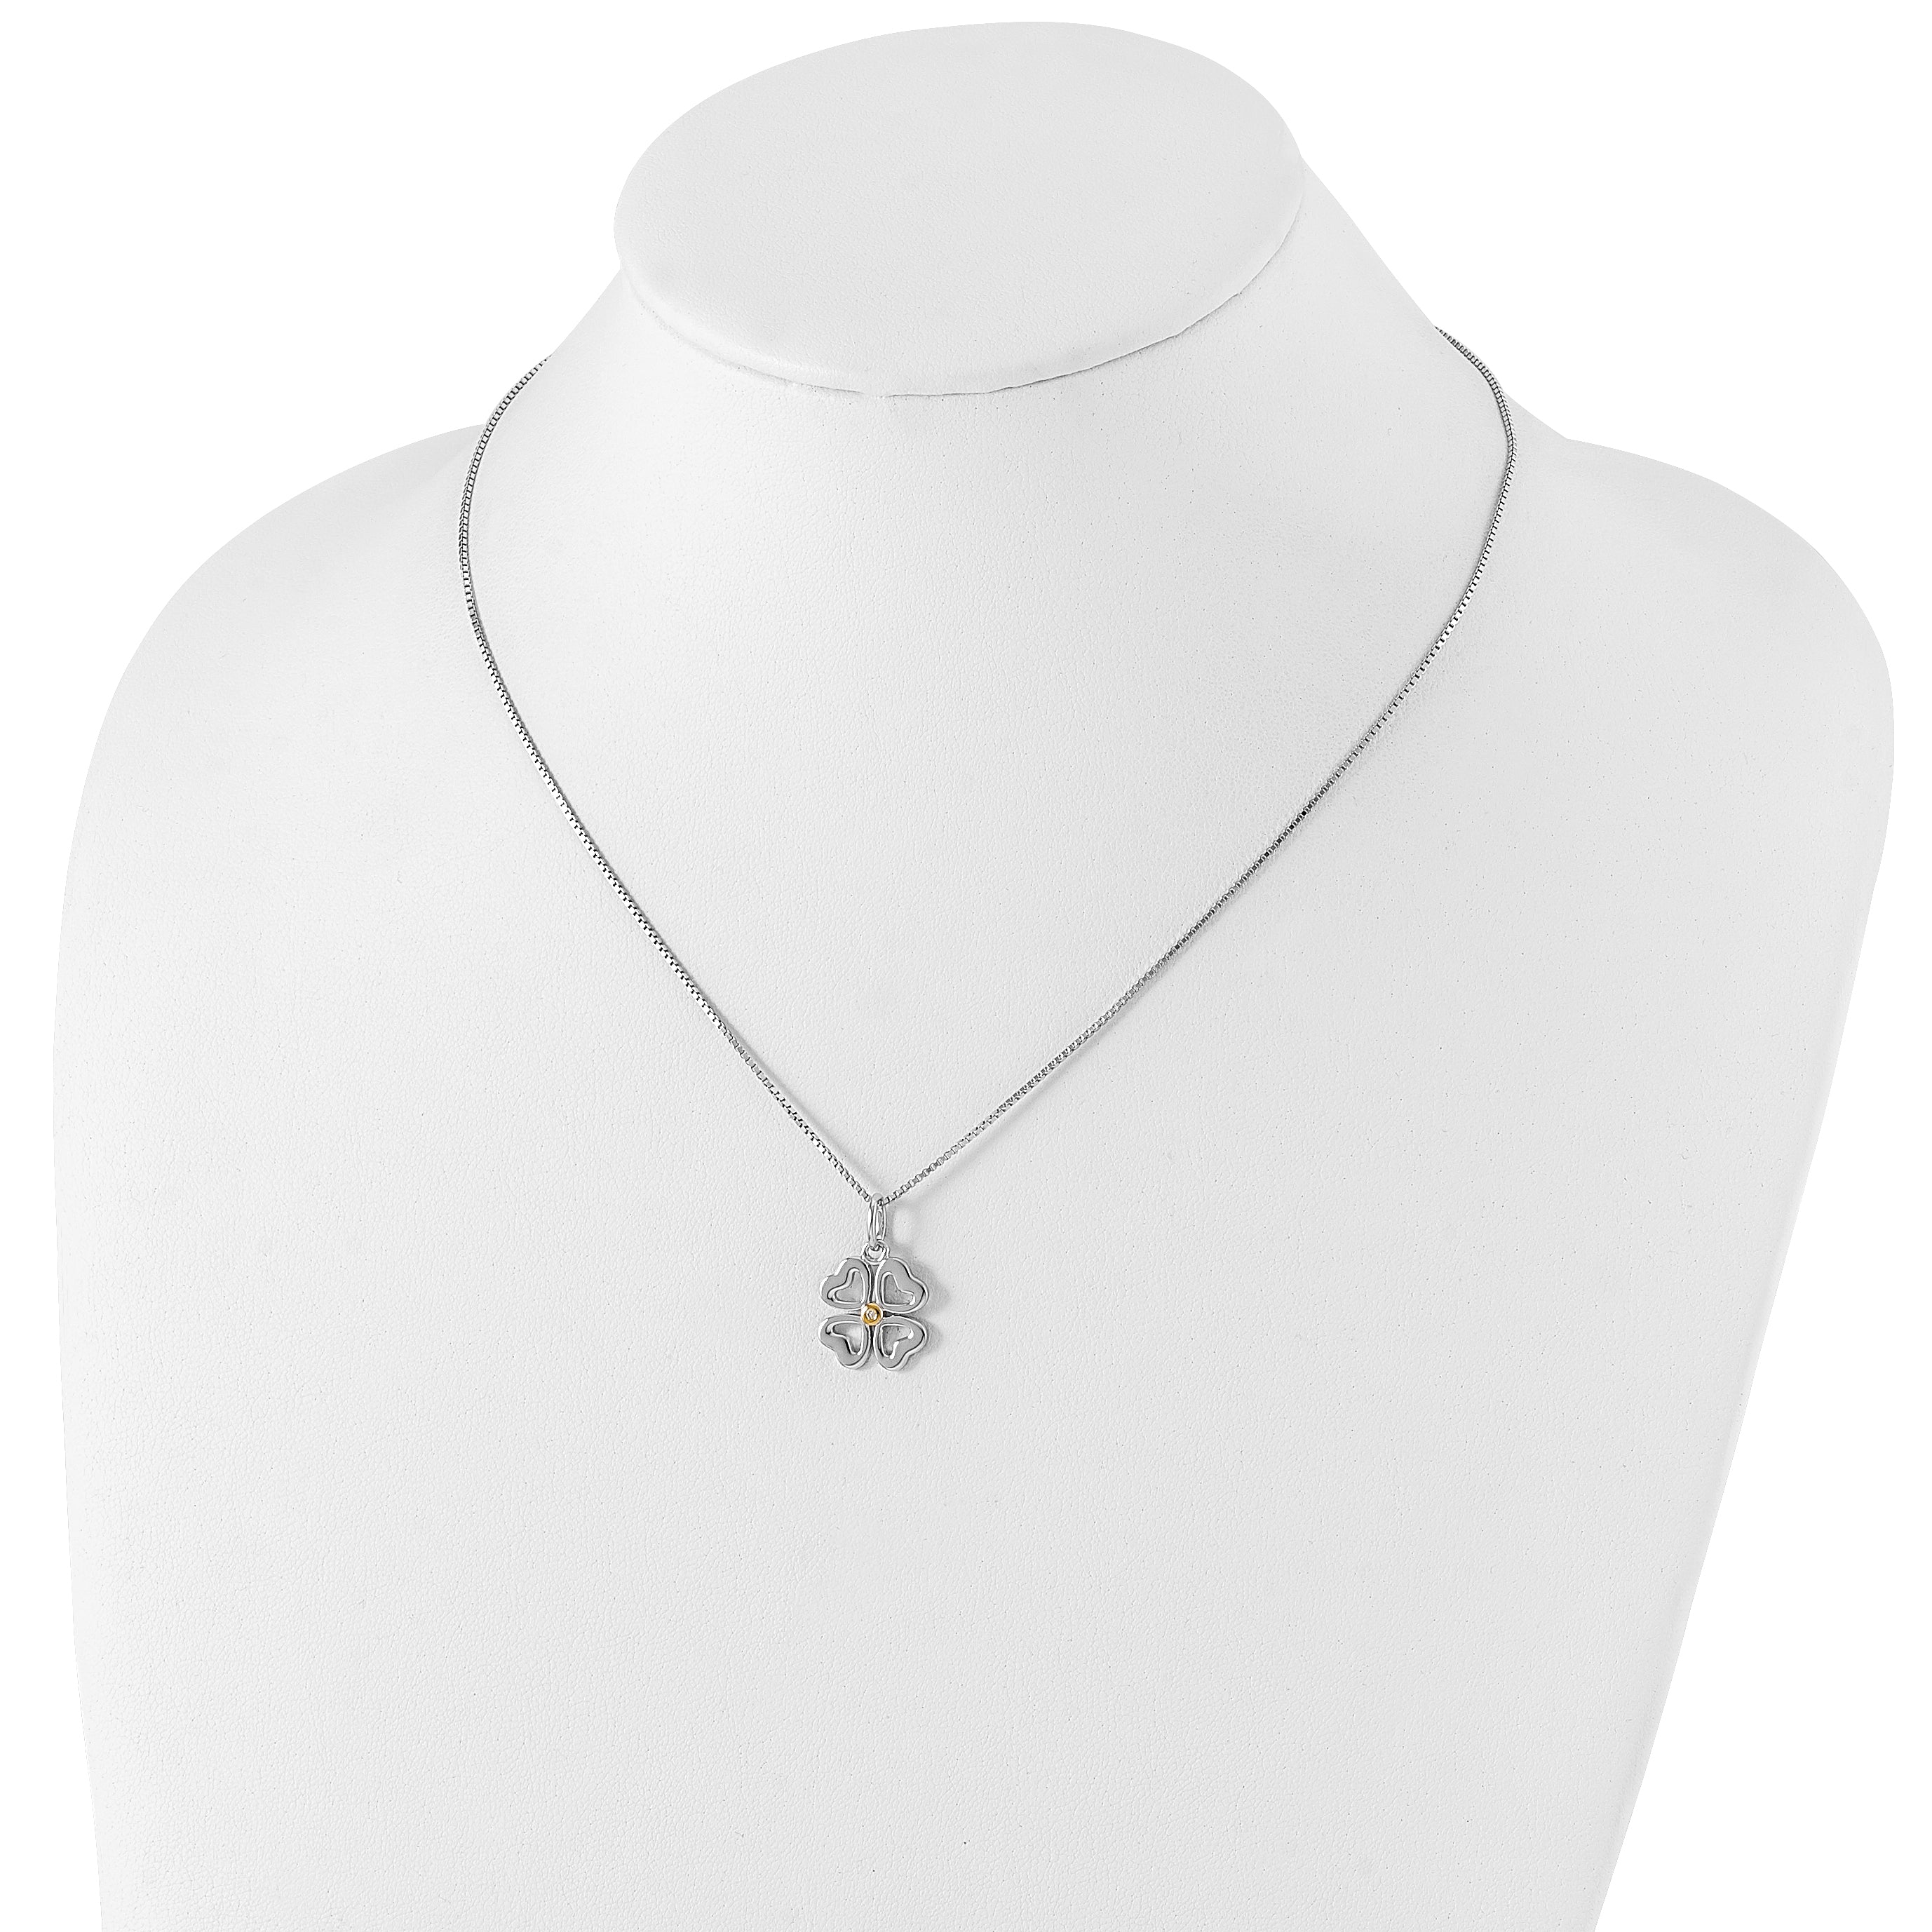 White Ice Sterling Silver Rhodium-plated Gold-tone 18 Inch Diamond Four Hearts Necklace with 2 Inch Extender